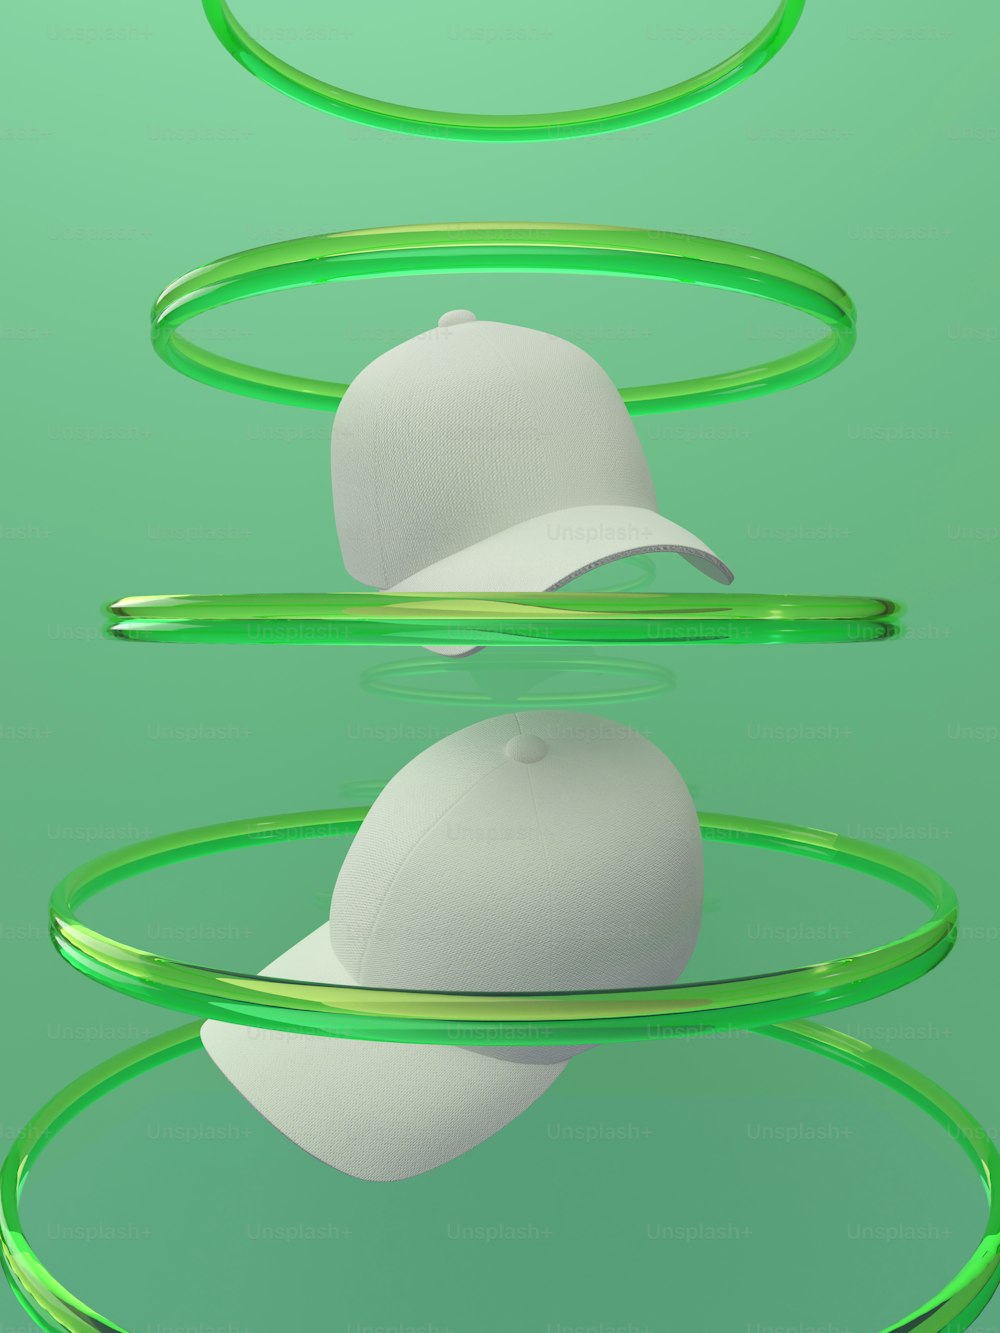 a white baseball cap sitting on top of a green object